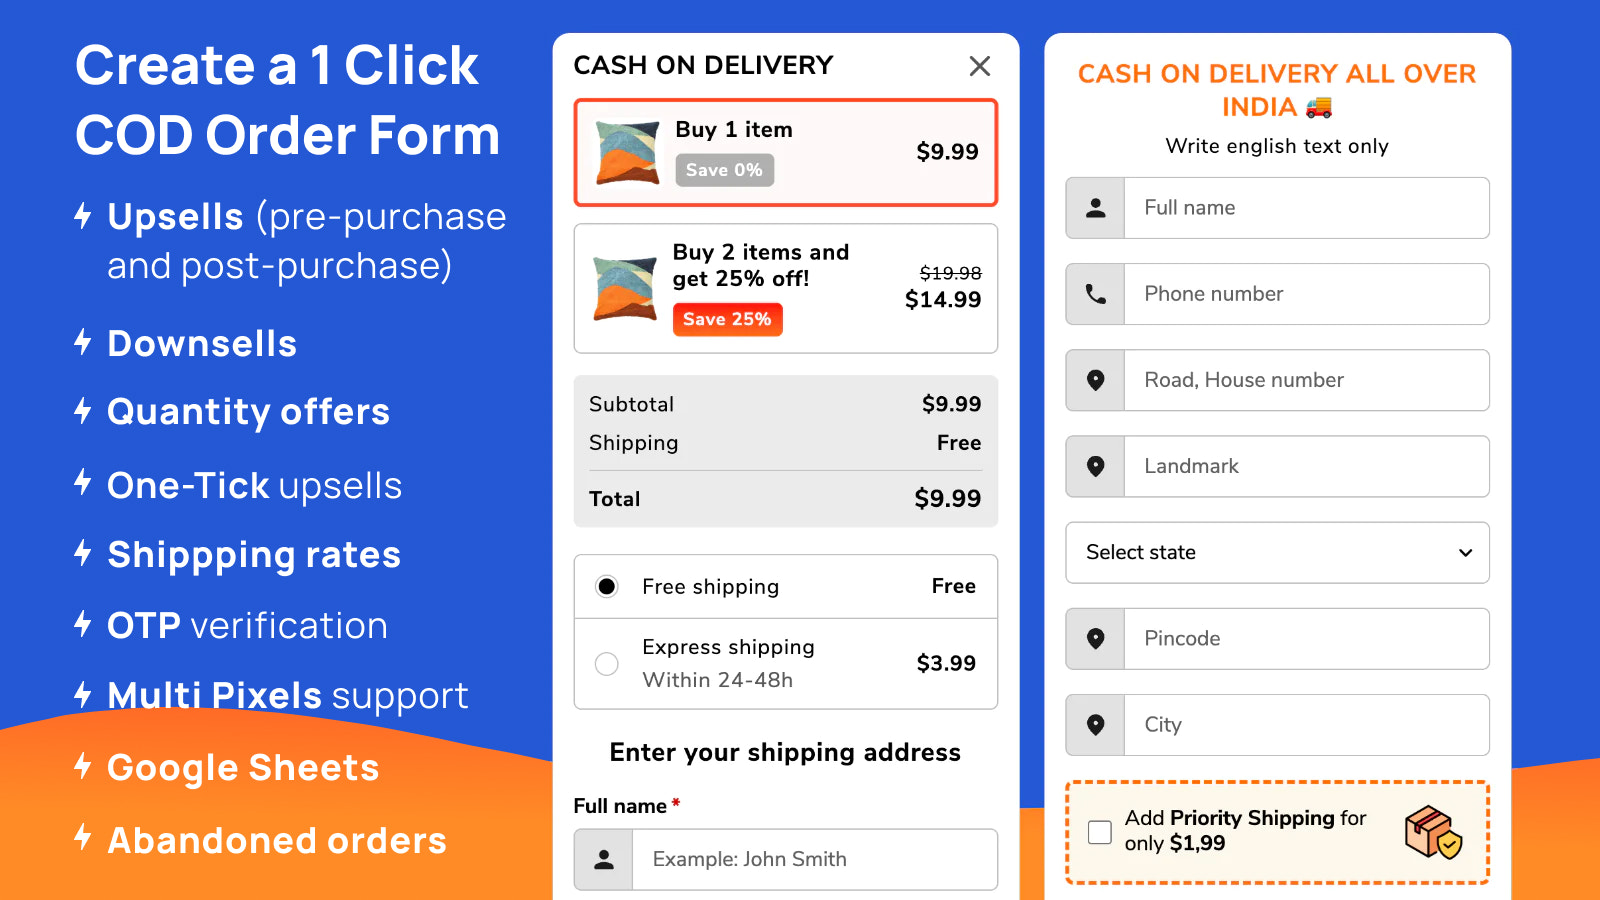 Create a 1 click order form for Cash on Delivery orders